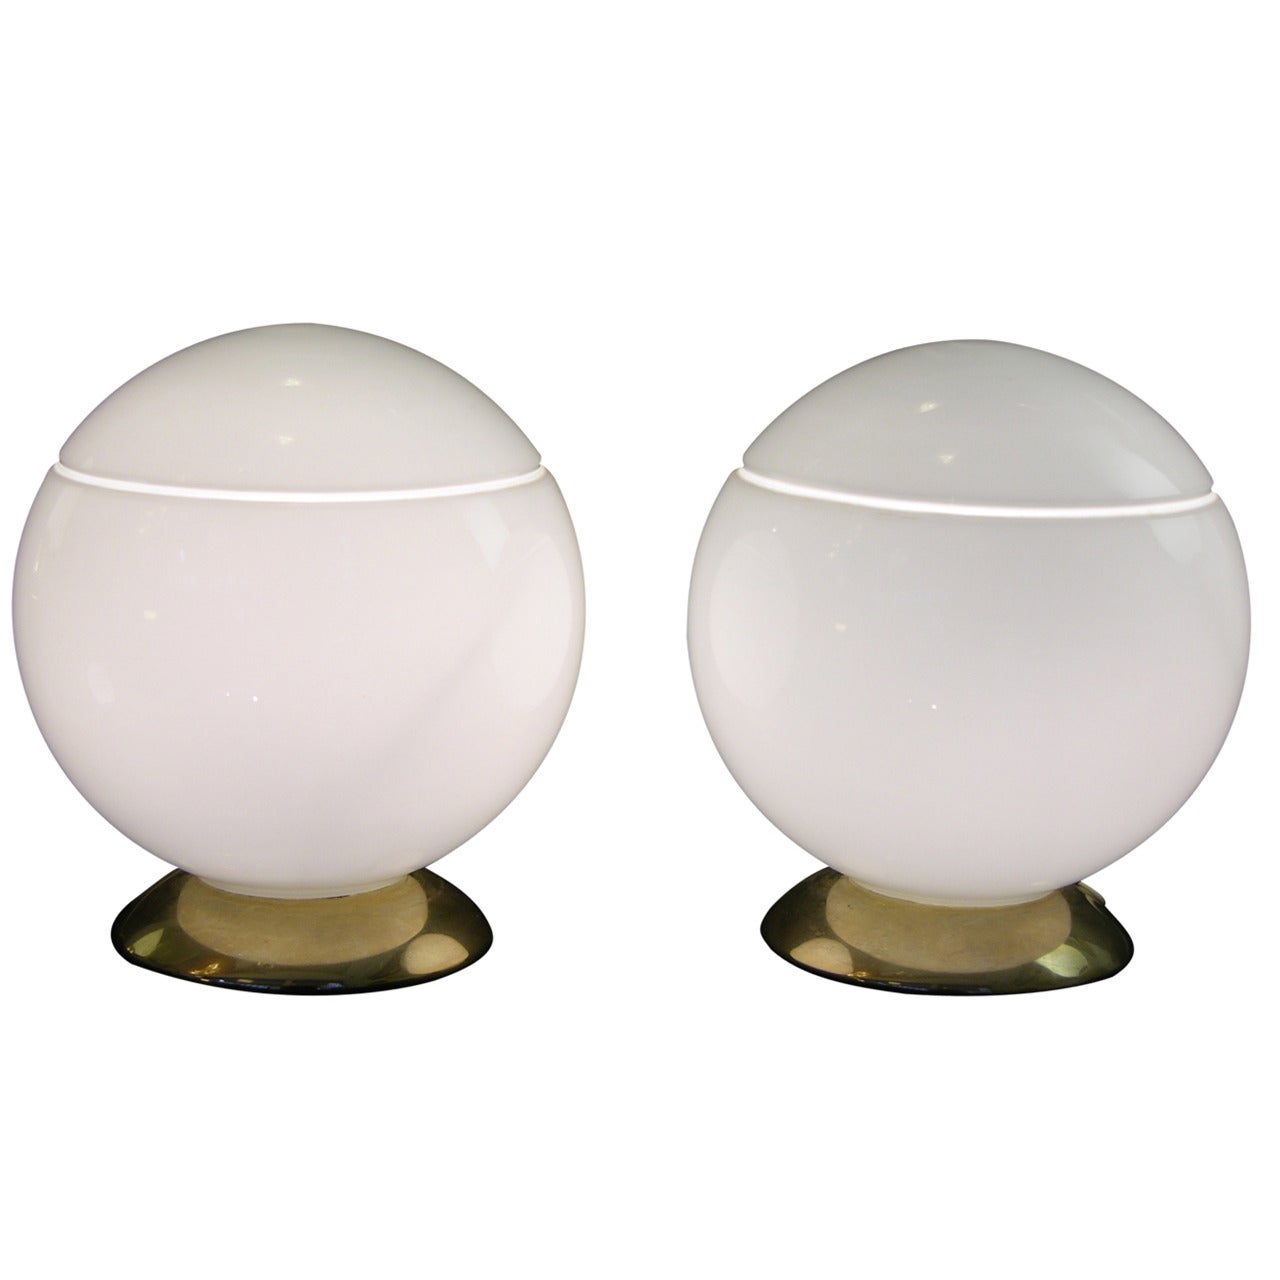 1950s Italian Pair of Round Silk White Murano Glass Lamps by Res